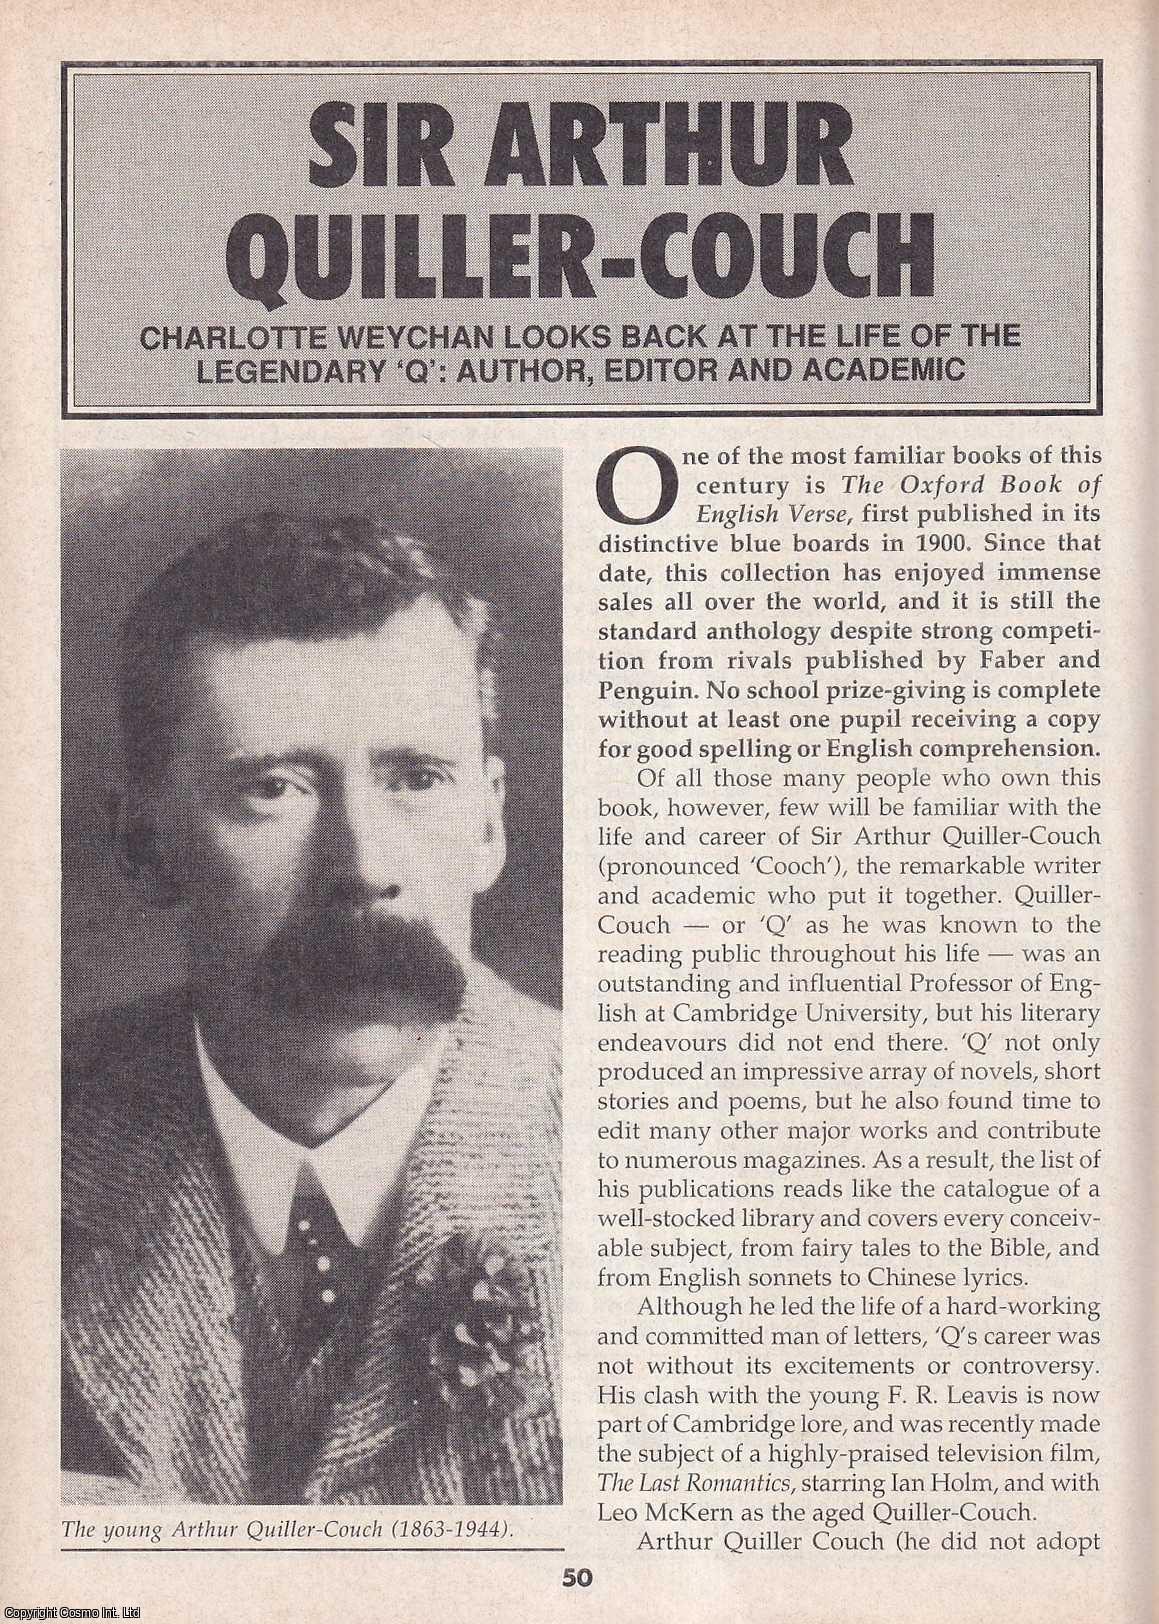 Charlotte Weychan - Sir Arthur Quiller-Couch : Legendary Author, Editor and Academic. This is an original article separated from an issue of The Book & Magazine Collector publication, 1992.